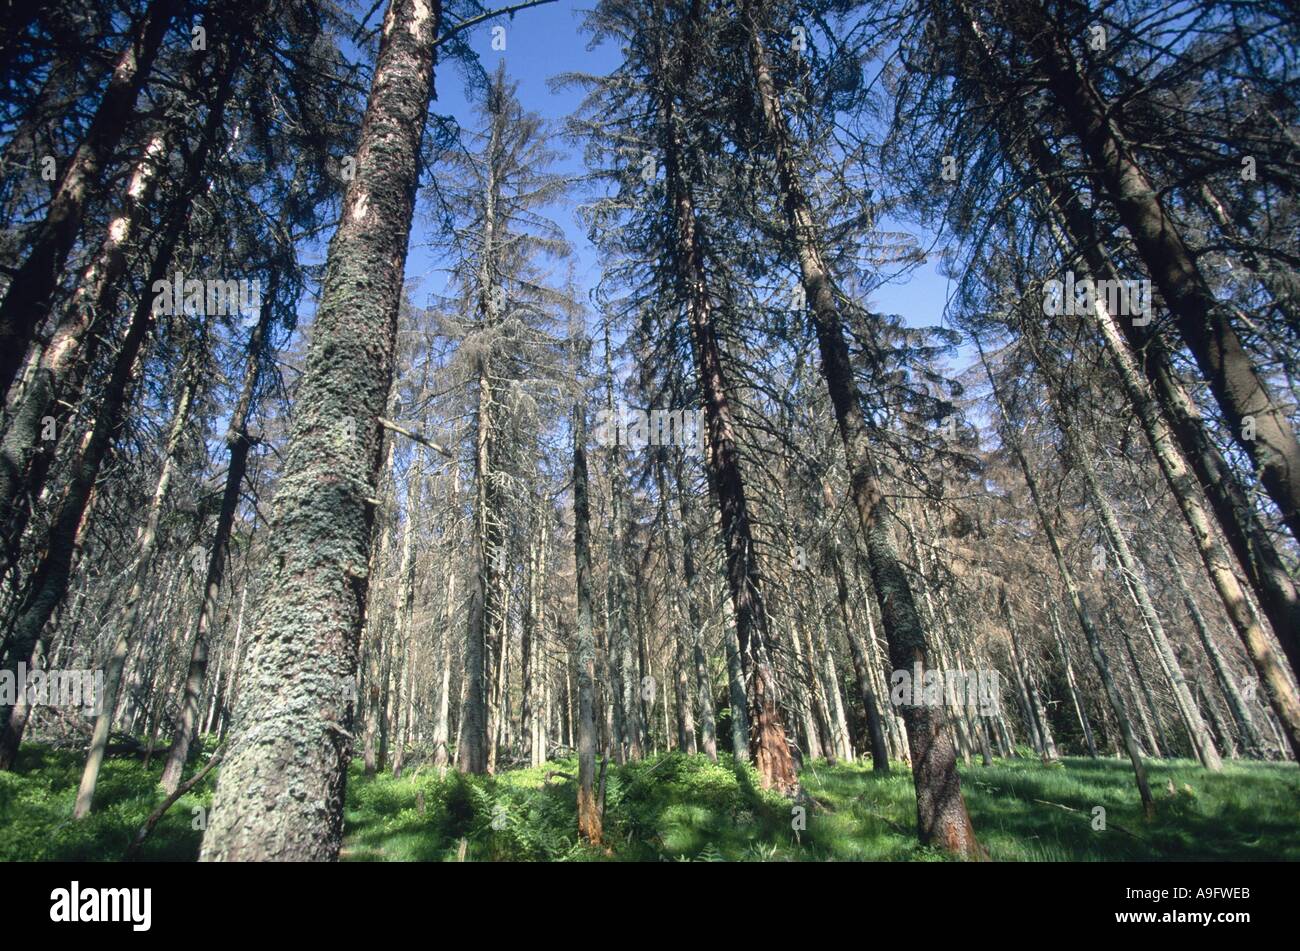 Norway Spruce Picea Abies Forest Damaged By Bark Beetles Germany Np Bavarian Forest Stock Photo Alamy